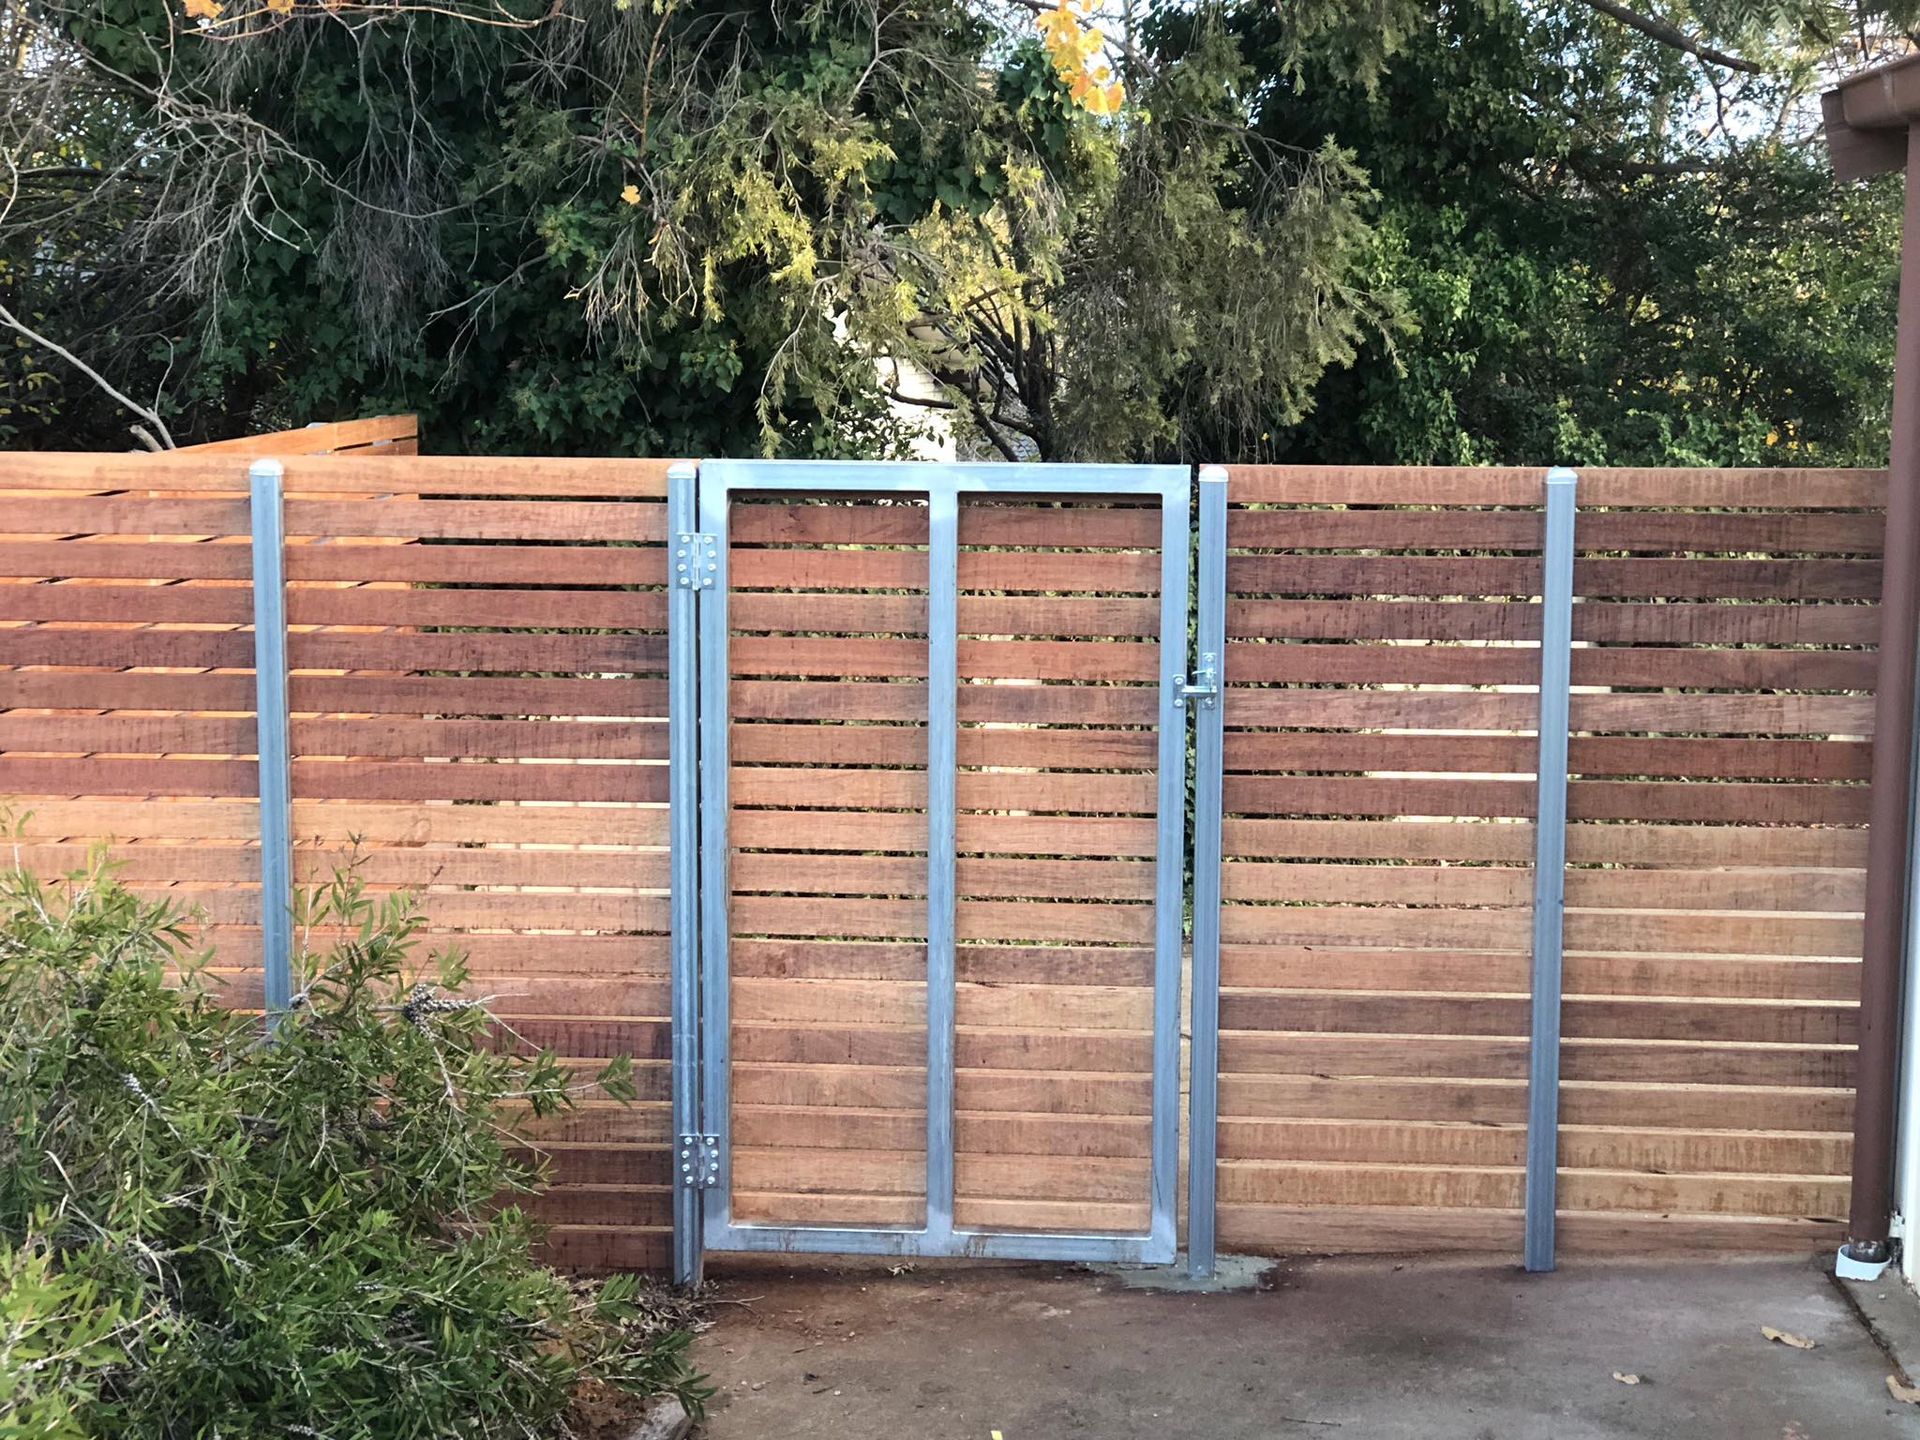 A wooden fence with a metal gate attached to it.